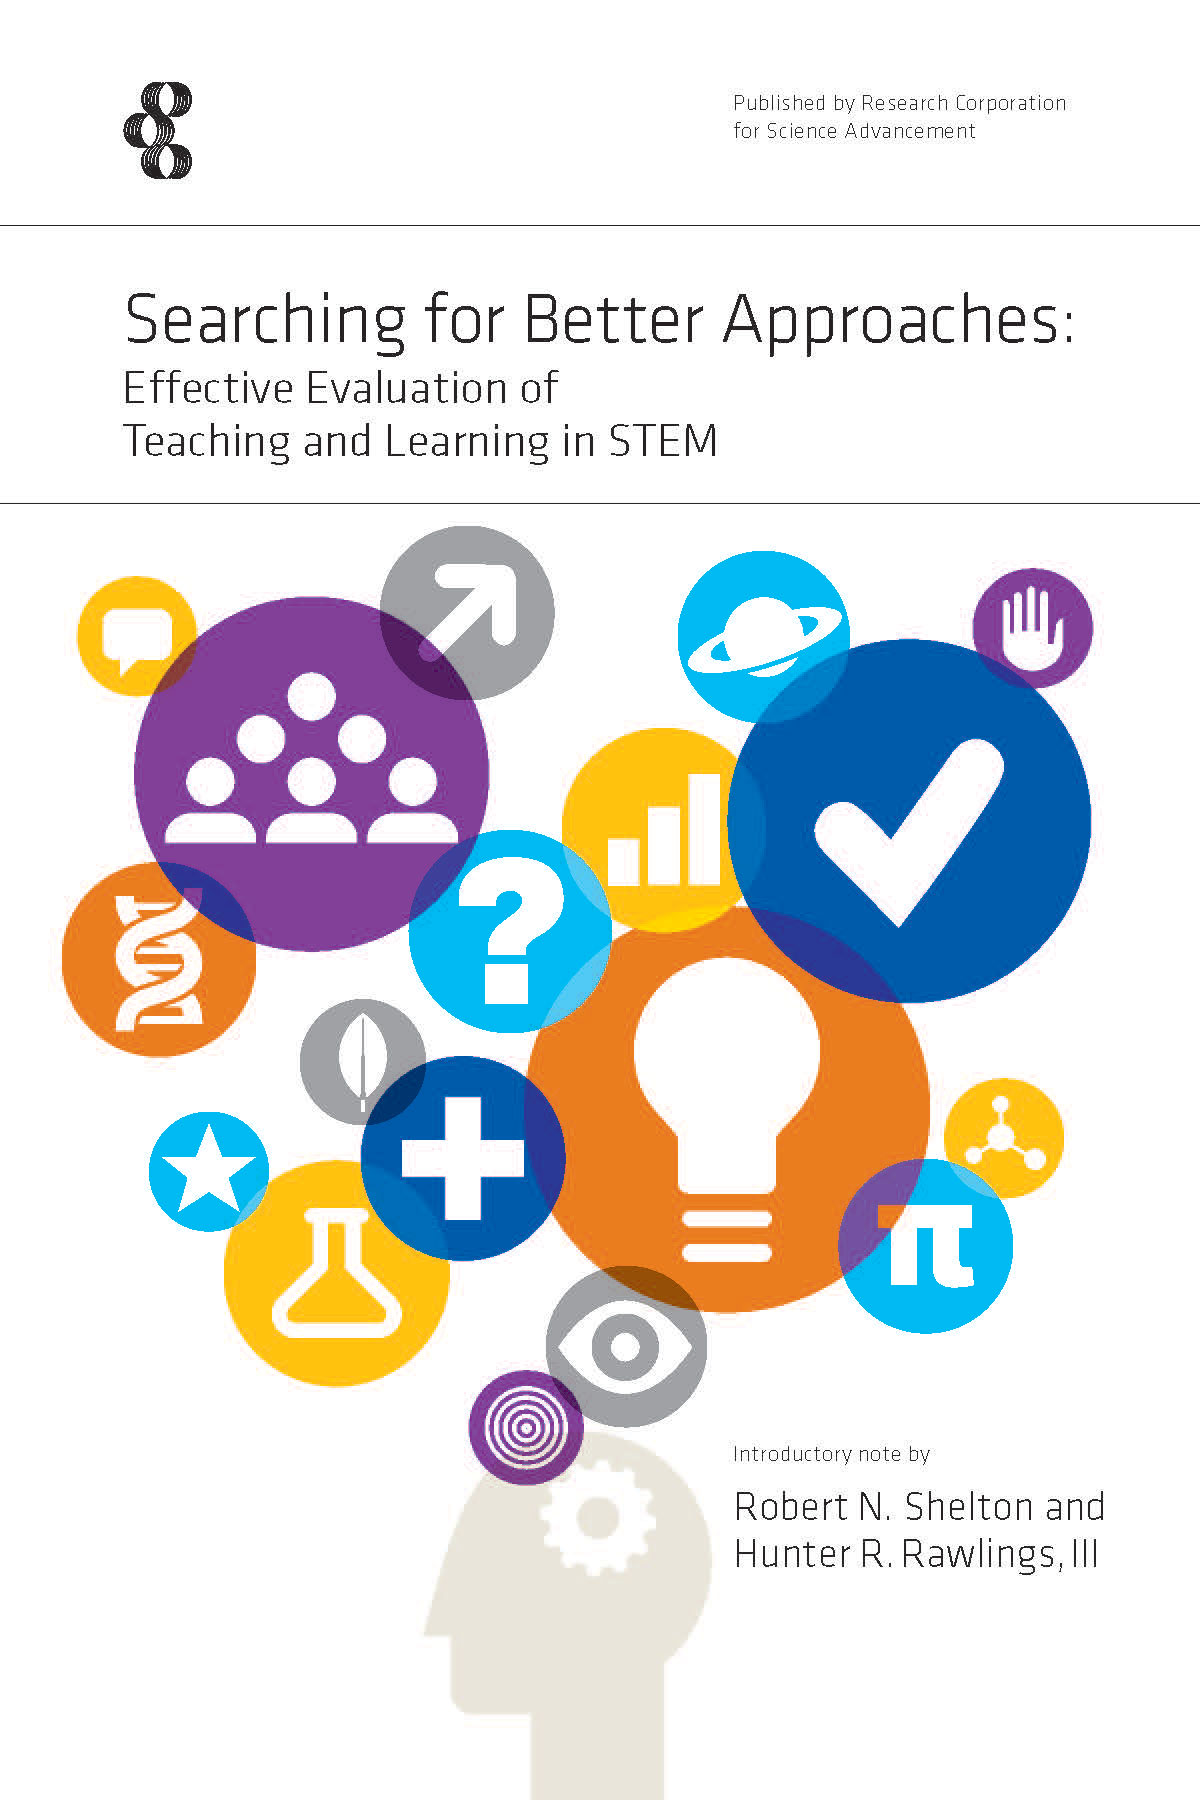 Searching for Better Approaches: Effective Evaluation of Teaching and Learning in STEM